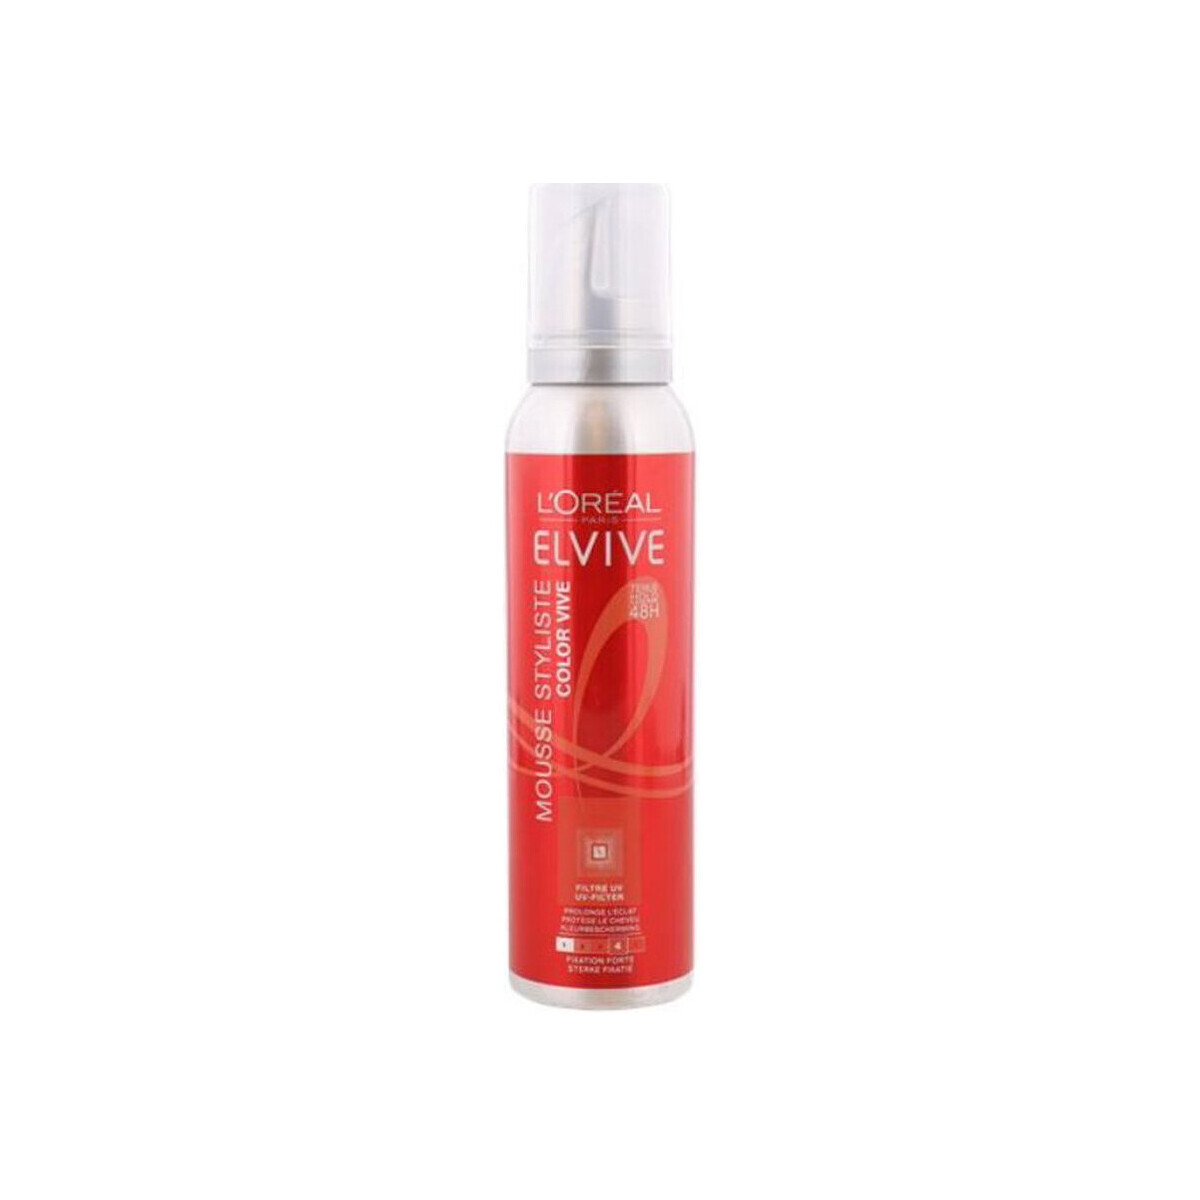 Beauty Damen Haarstyling L'oréal Colorvive Elvive Stylist Mousse Other